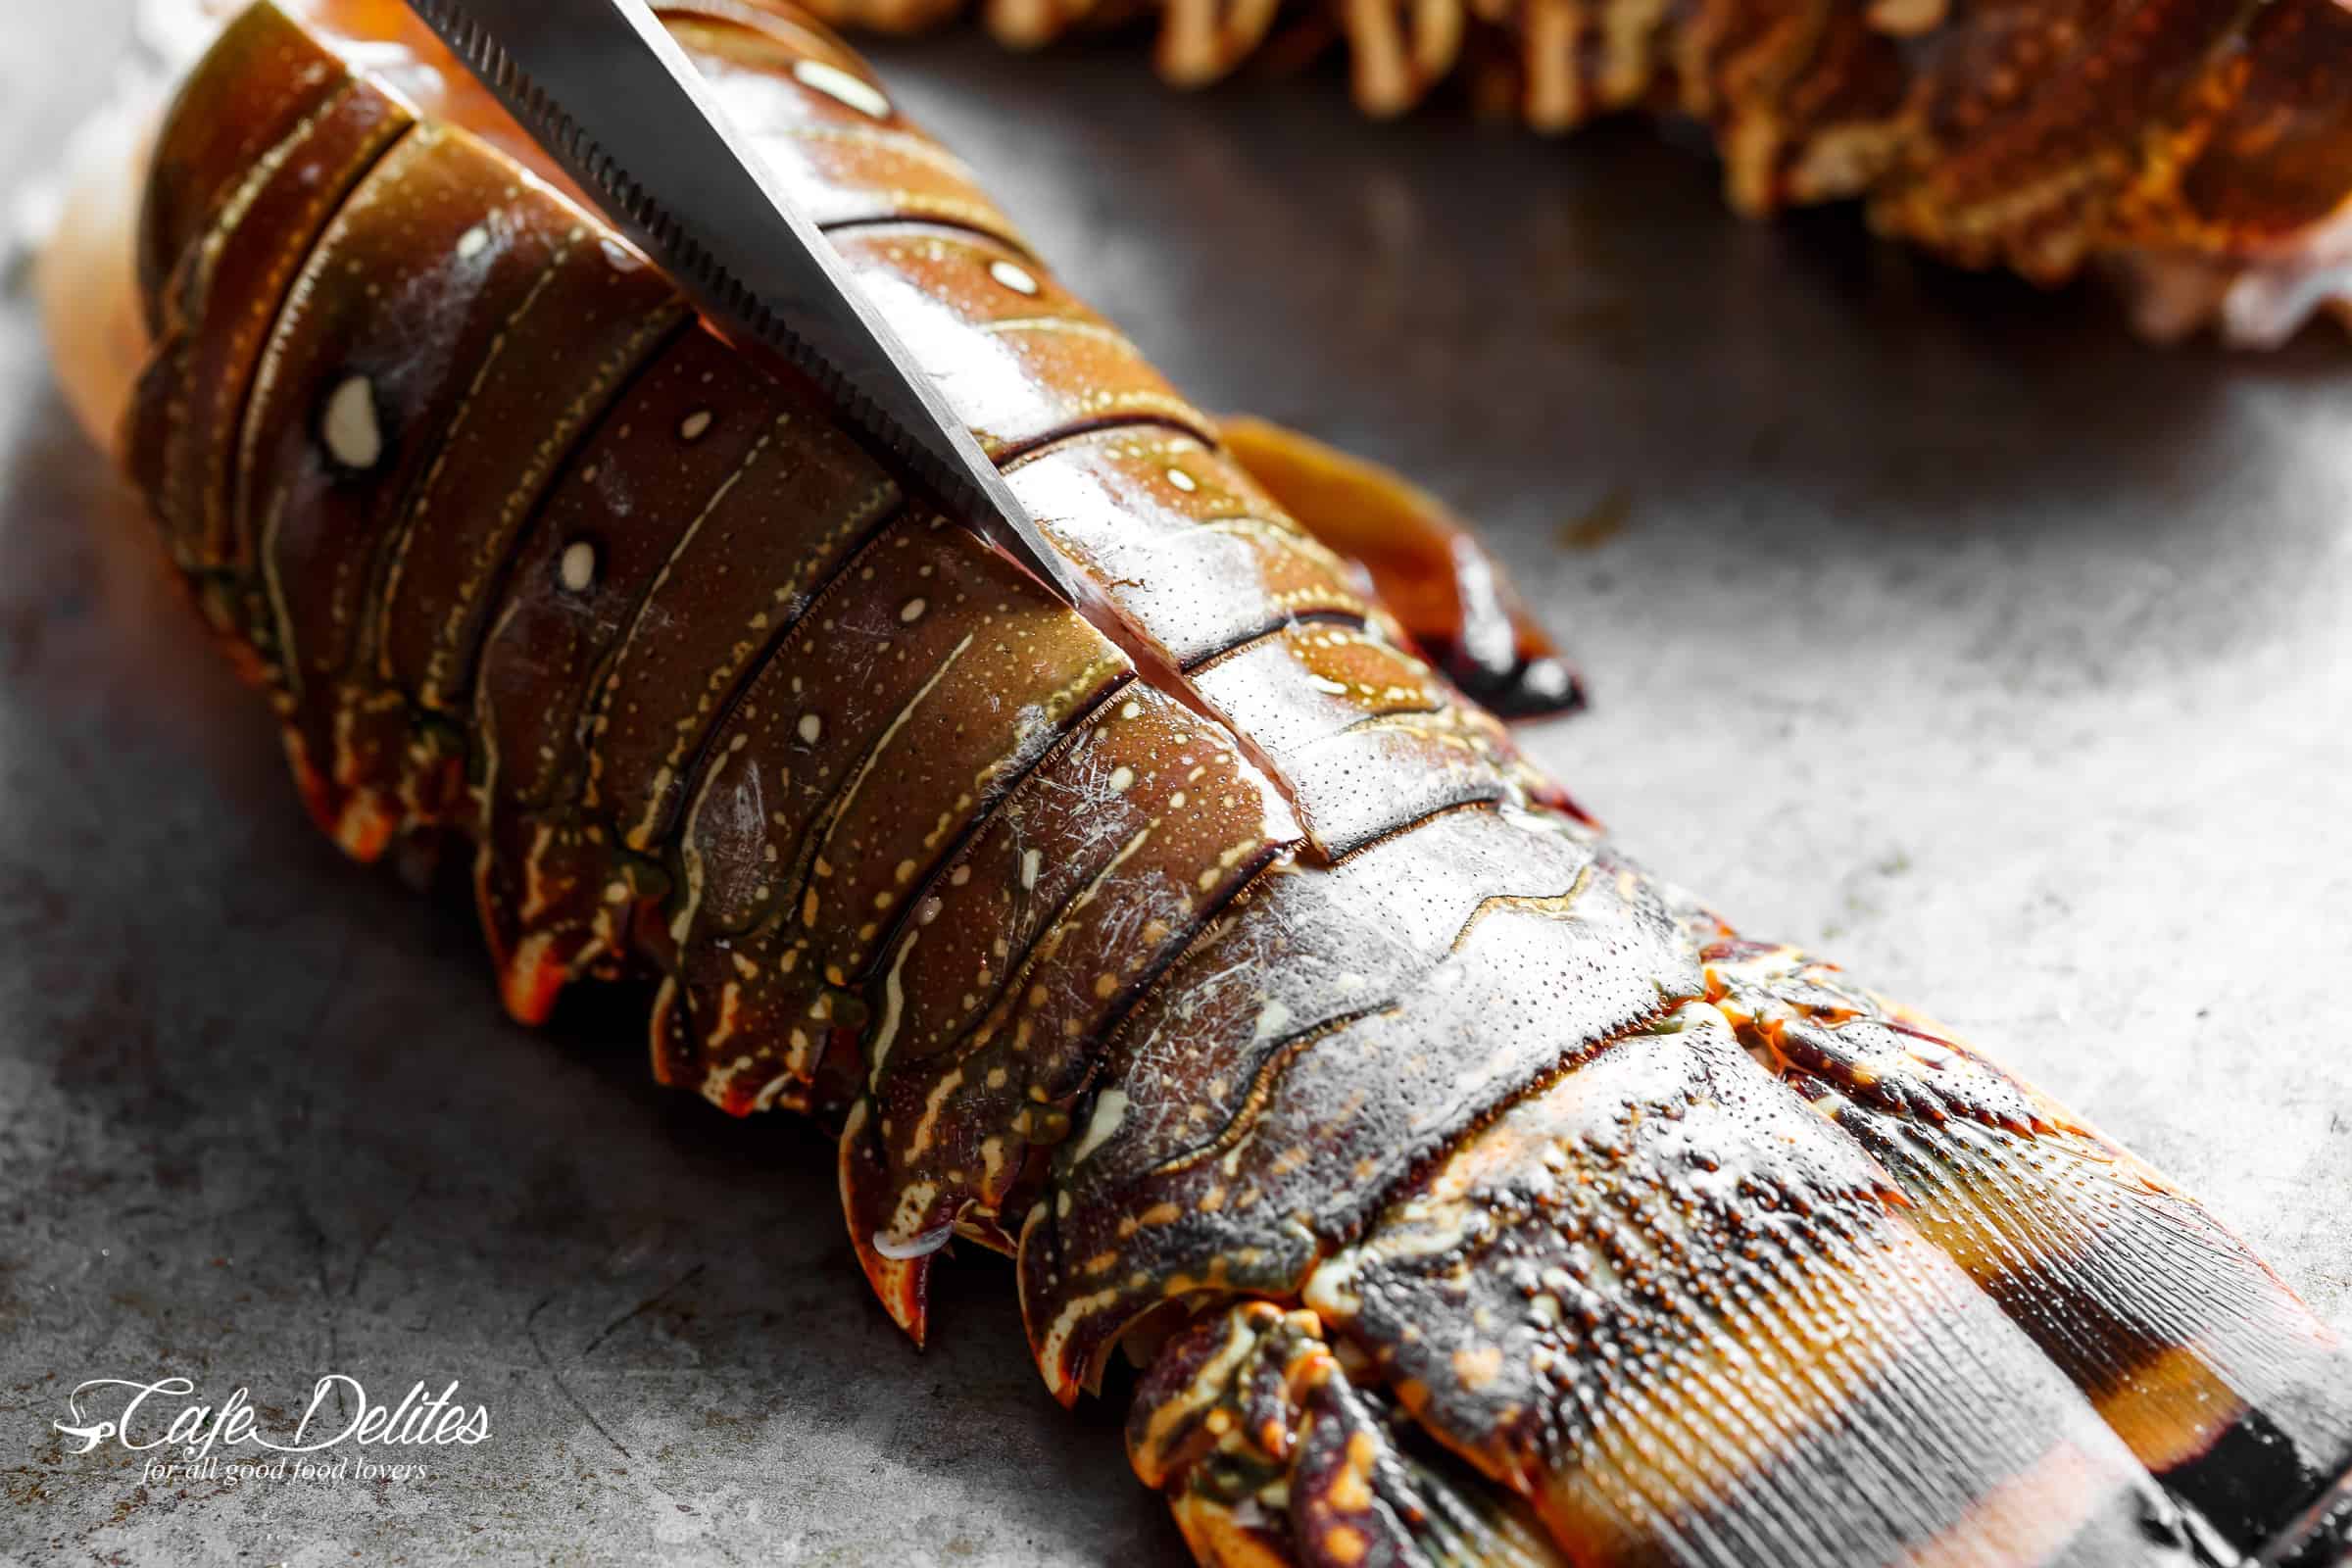 How to cut lobster tails | cafedelites.com